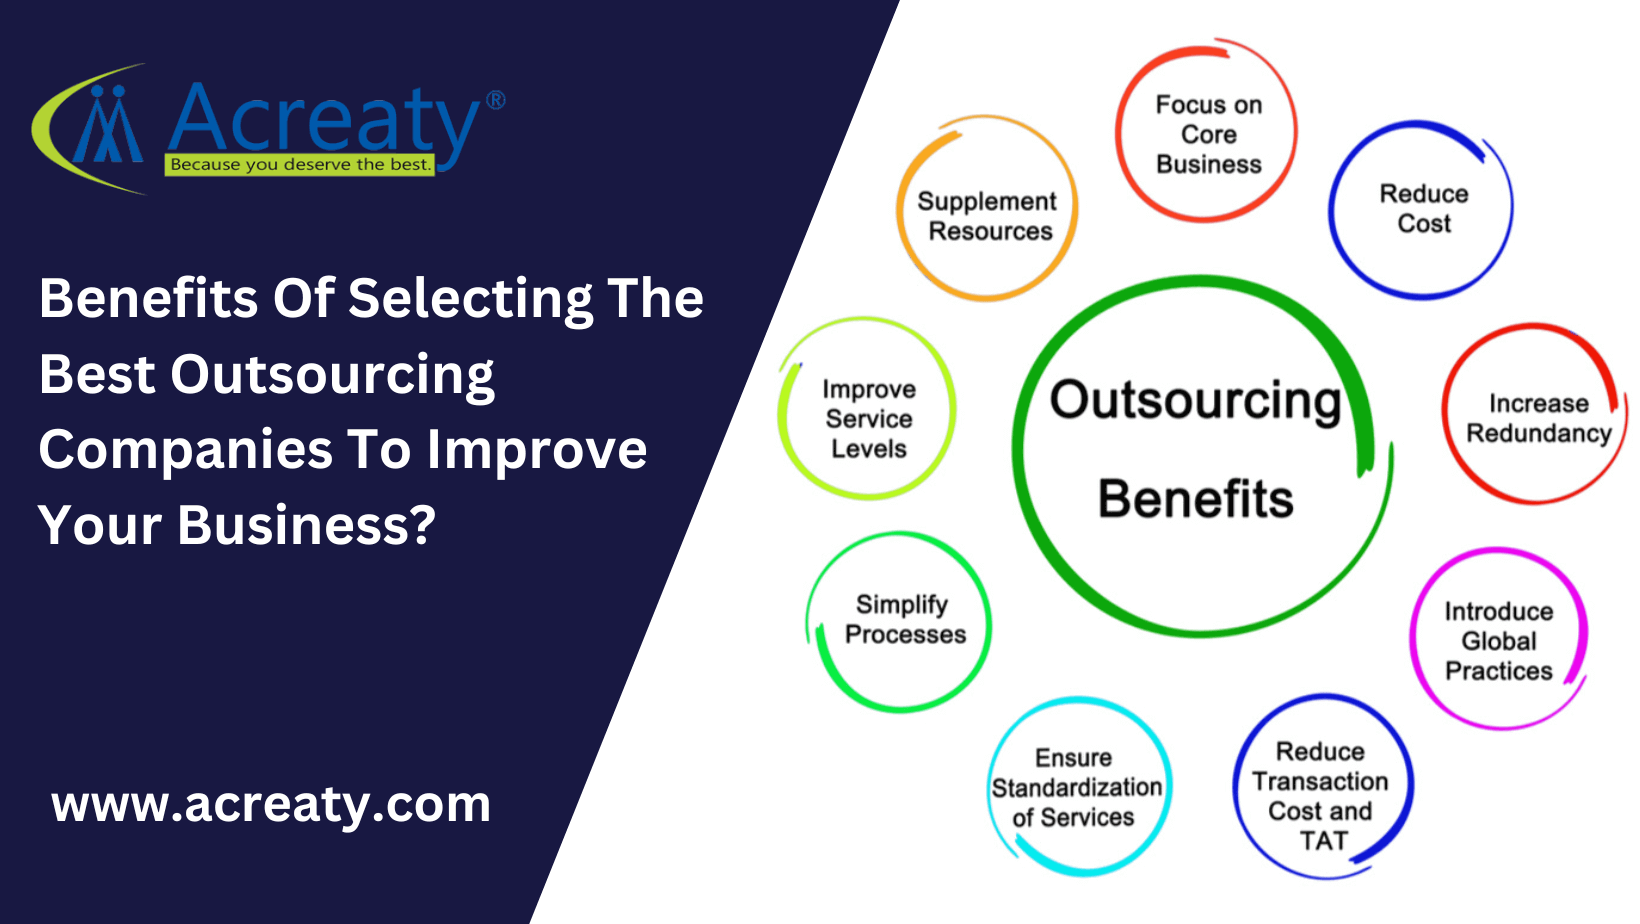 Benefits Of Selecting The Best Outsourcing Companies To Improve Your Business?